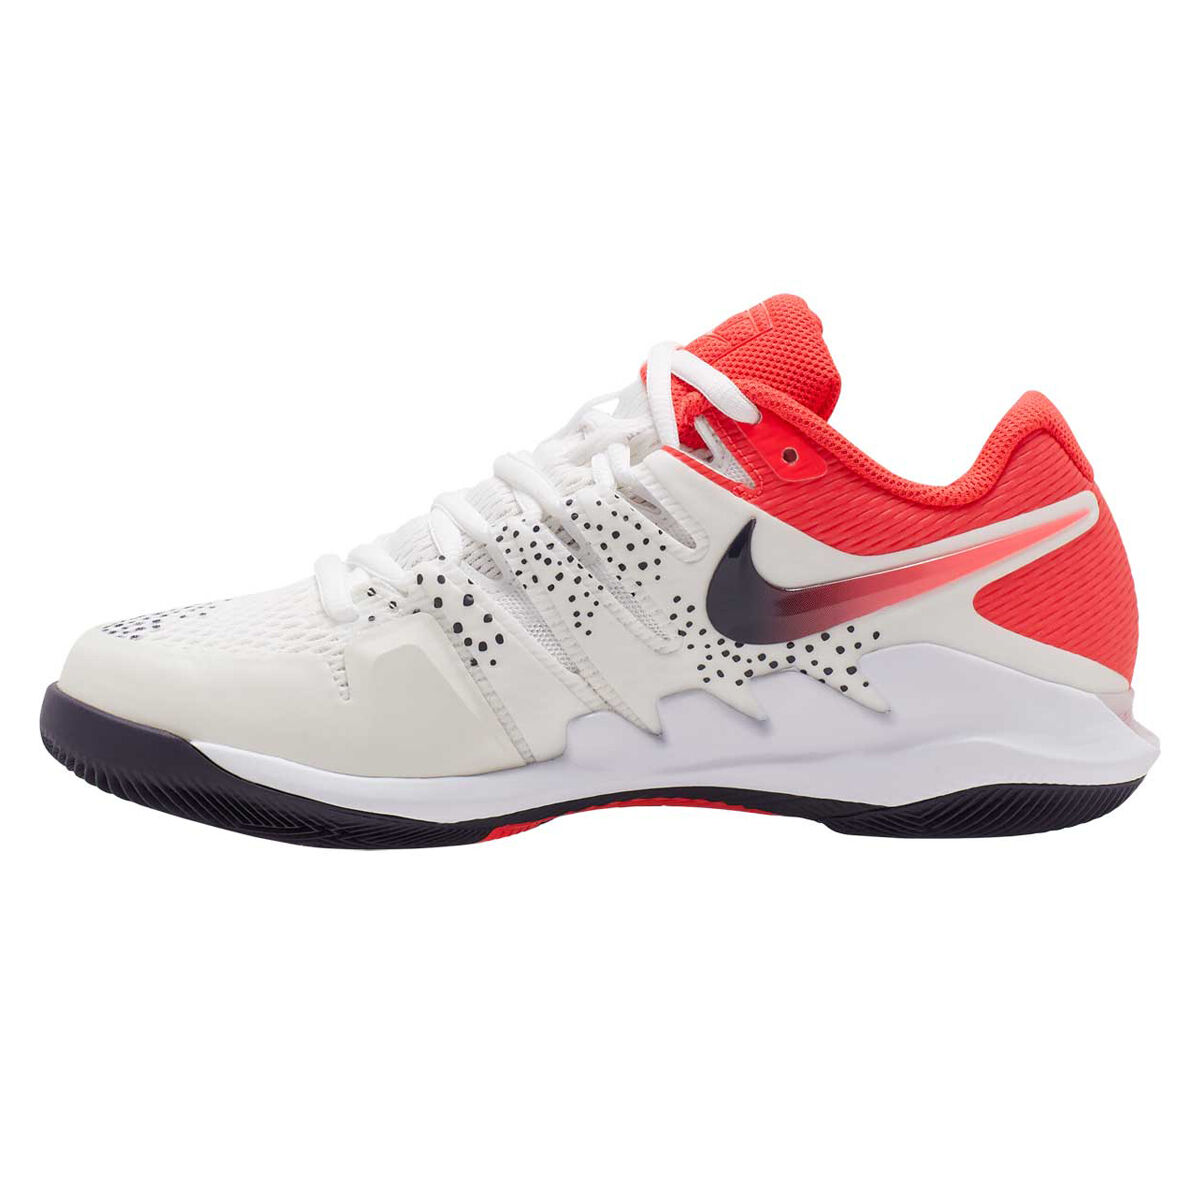 red nike womens tennis shoes